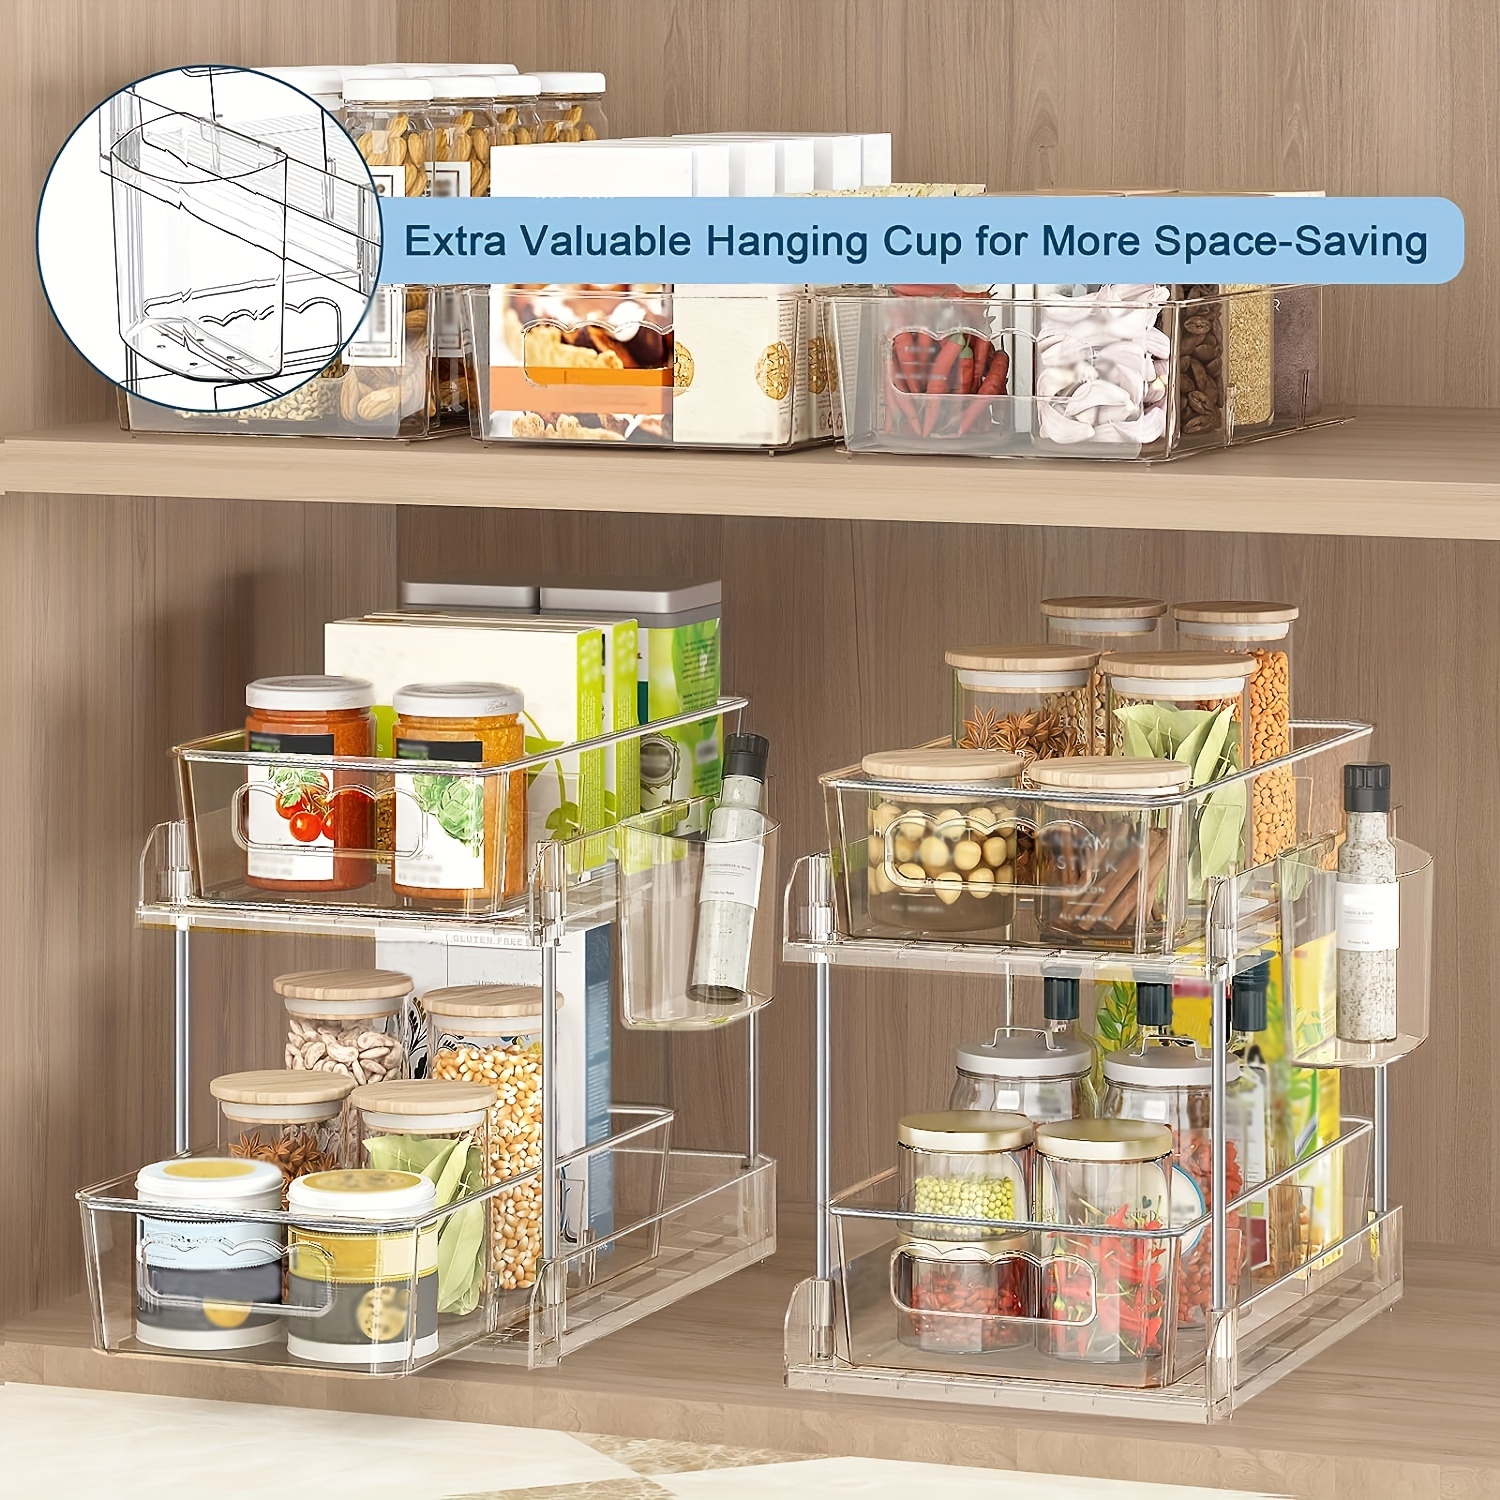 2 Tier Slide Out Under Sink Organizers and Storage with Removable Dividers  - Undersink Cabinet Drawers for Bathroom, Kithcen Cleaning and Organization